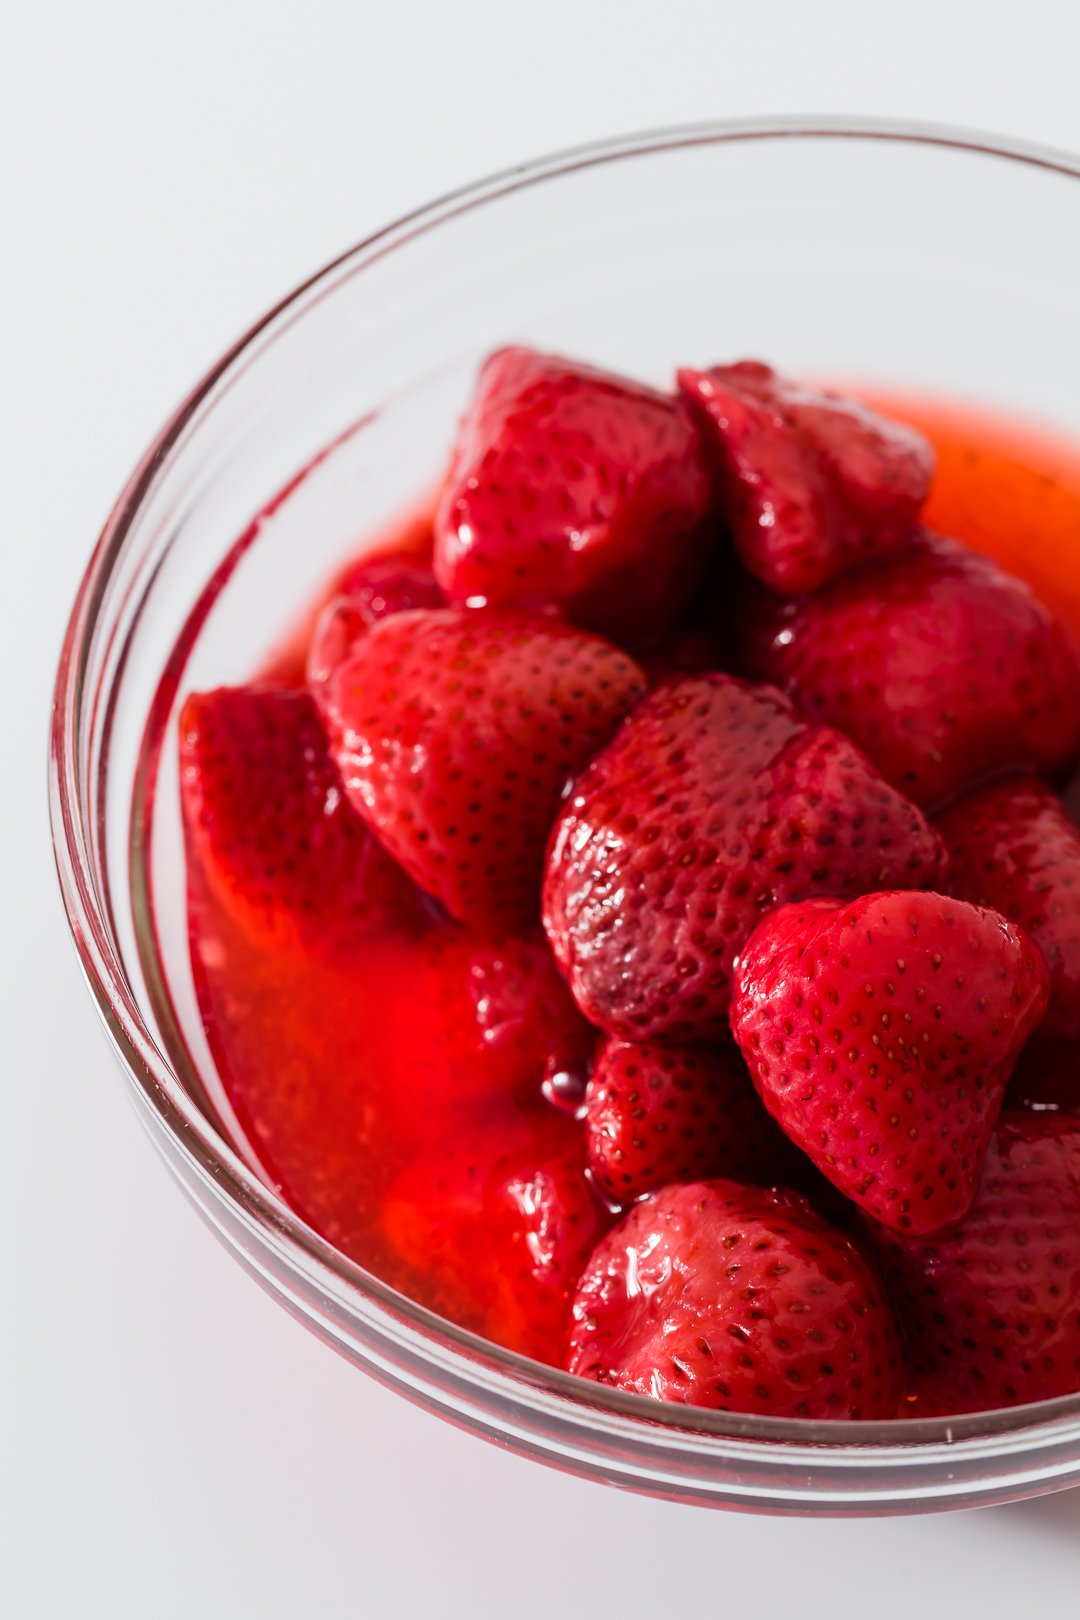 defrosted frozen strawberries in a glass bowl with lots of strawberry juice